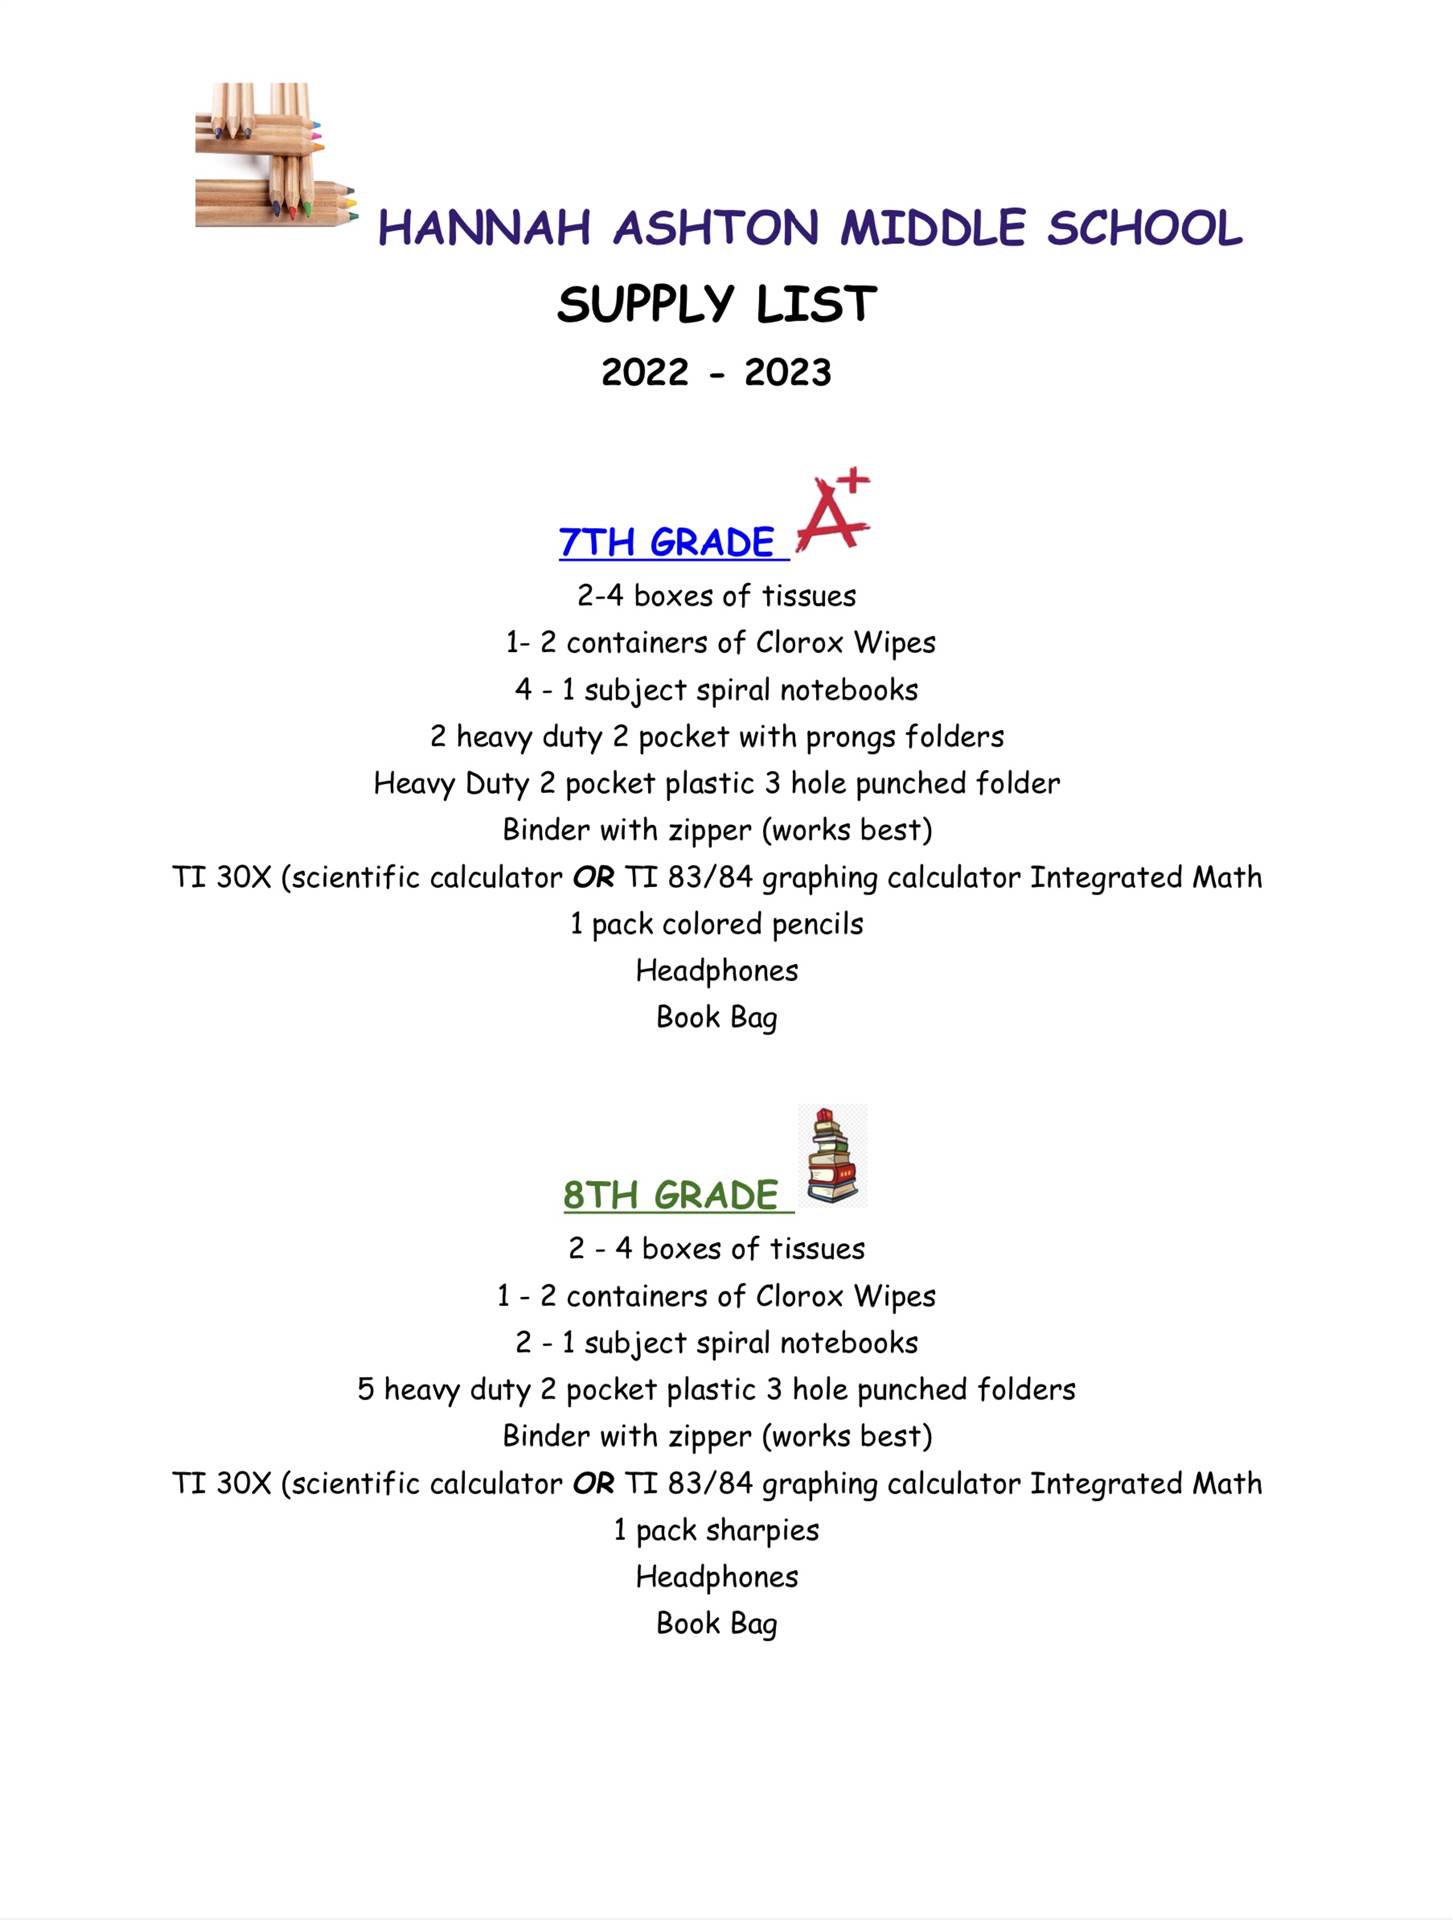 Supply Lists for 7th and 8th Grade